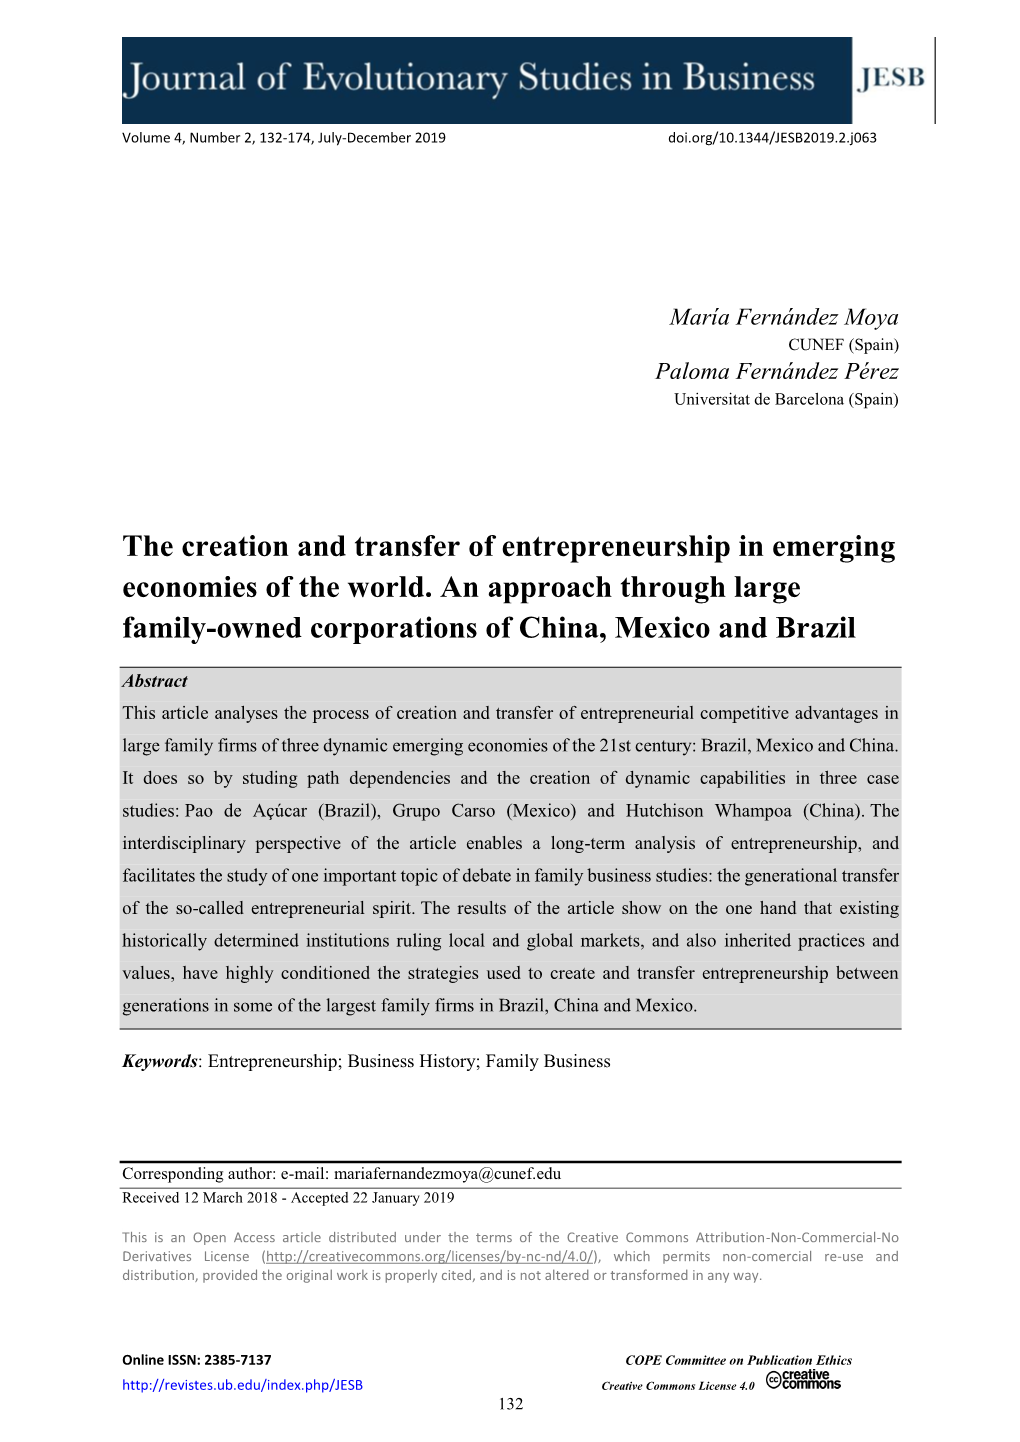 The Creation and Transfer of Entrepreneurship in Emerging Economies of the World